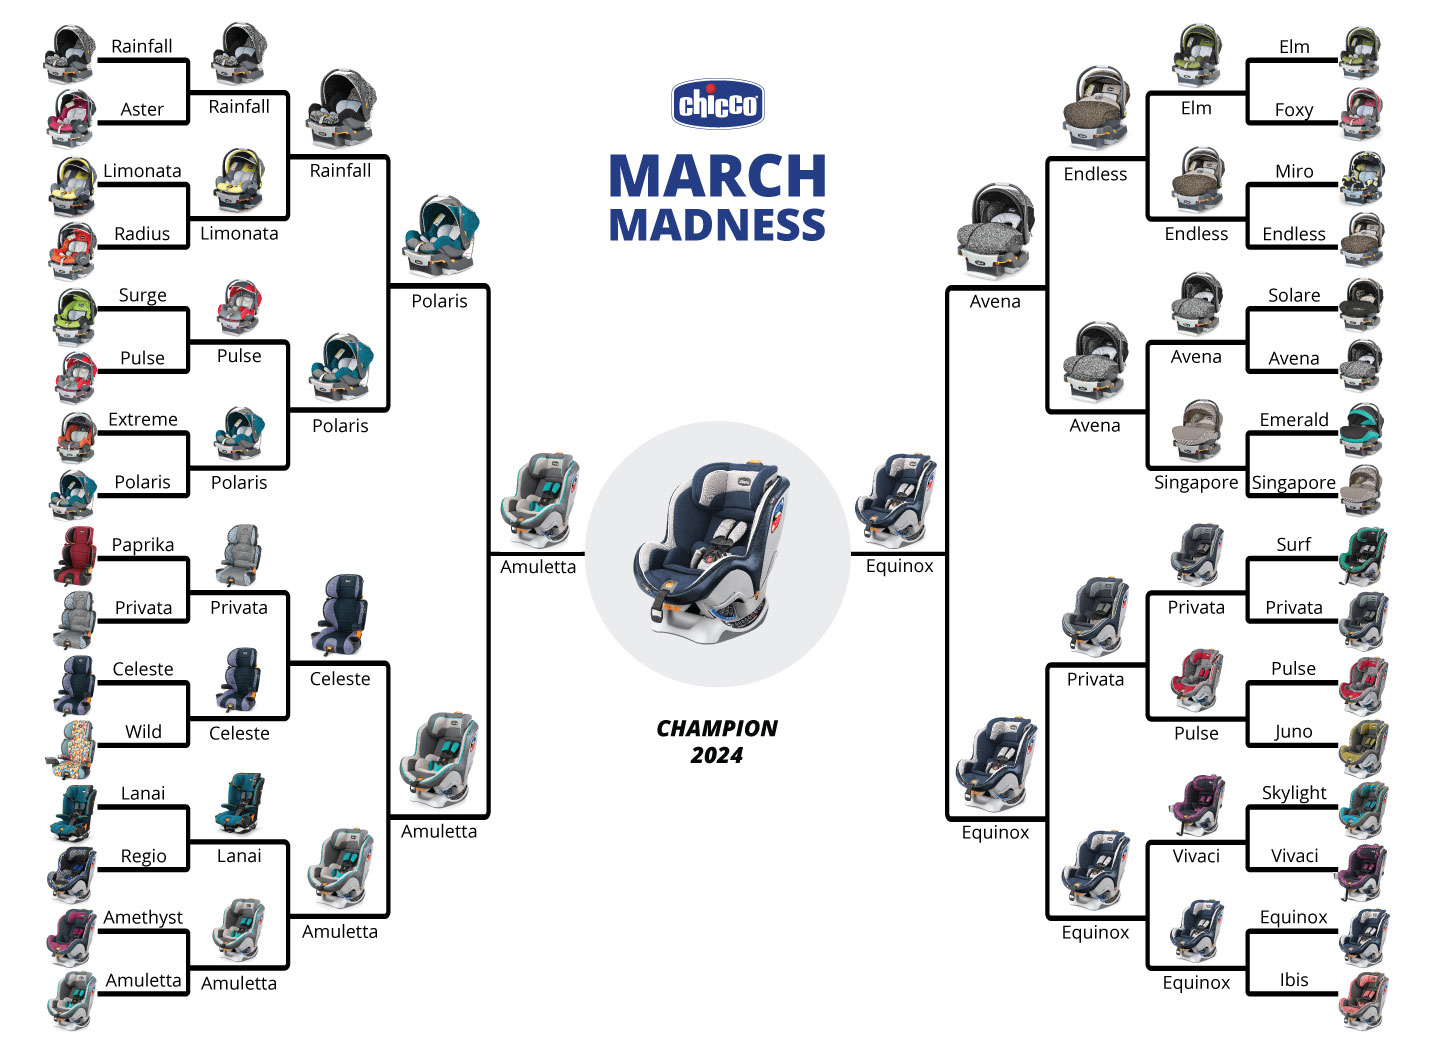 Chicco March Madness image